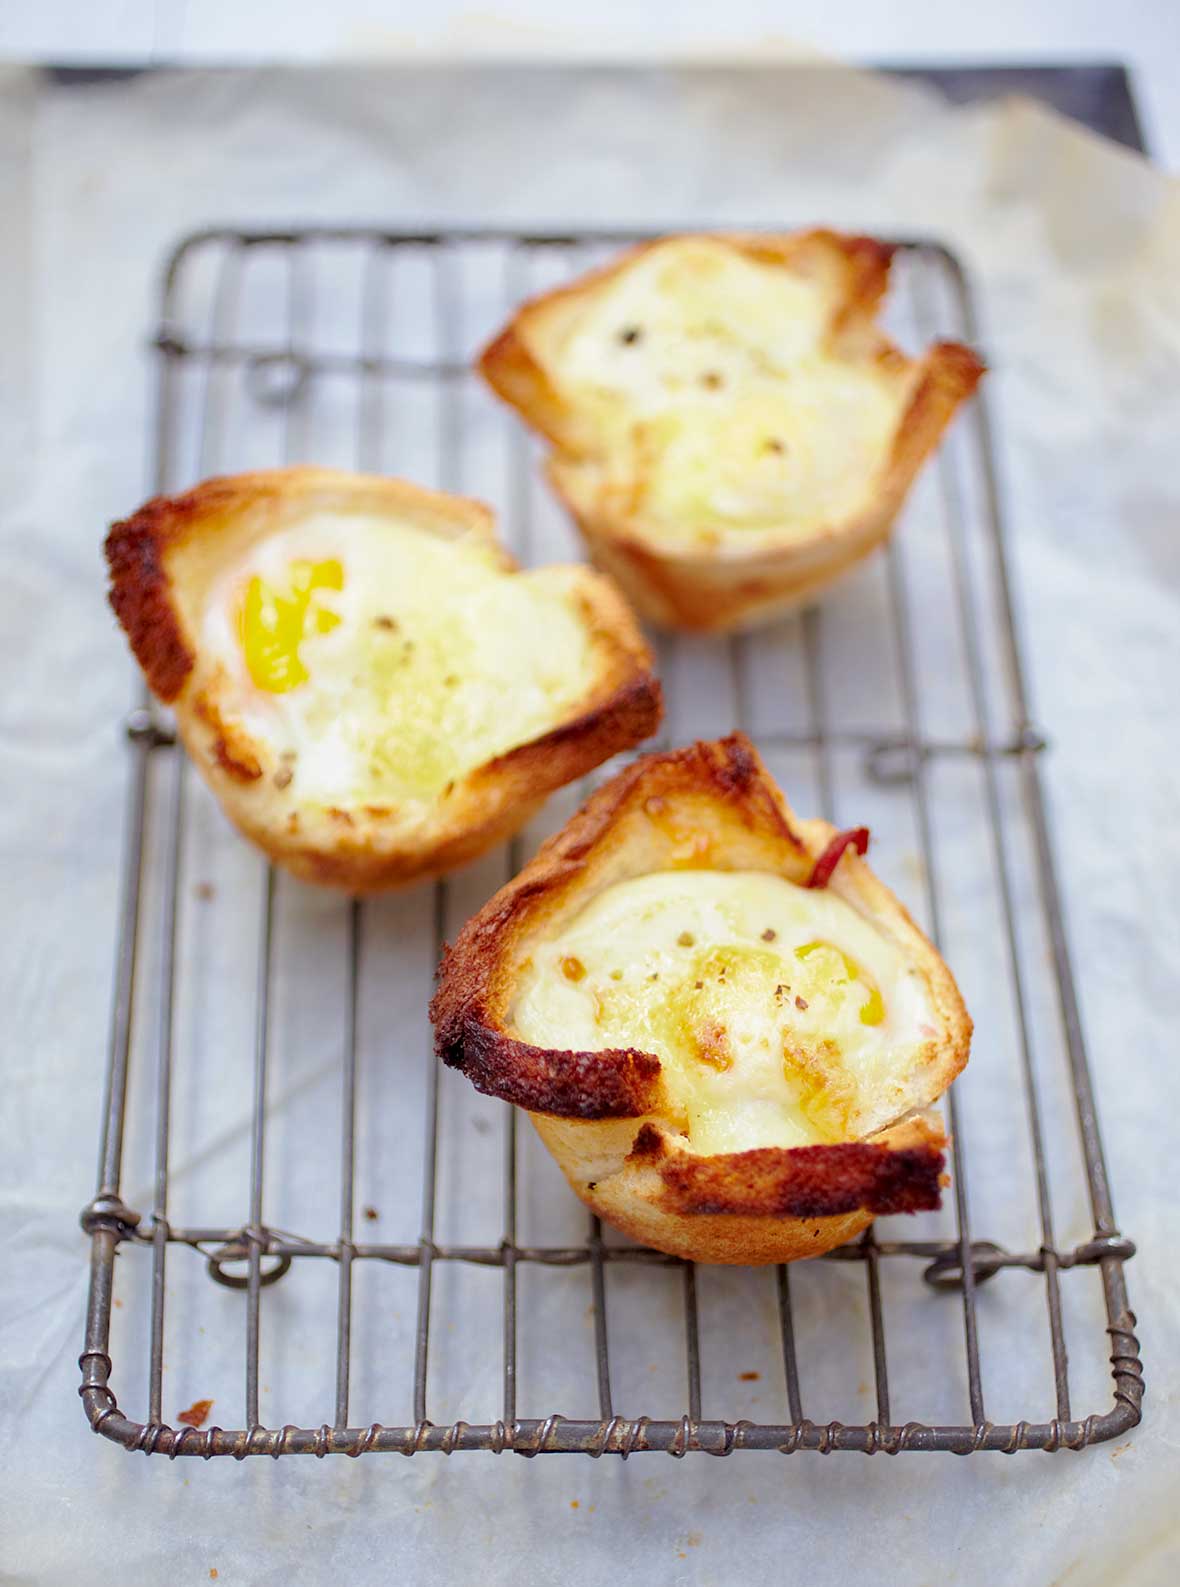 Amazing Croque Madame Pictures & Backgrounds